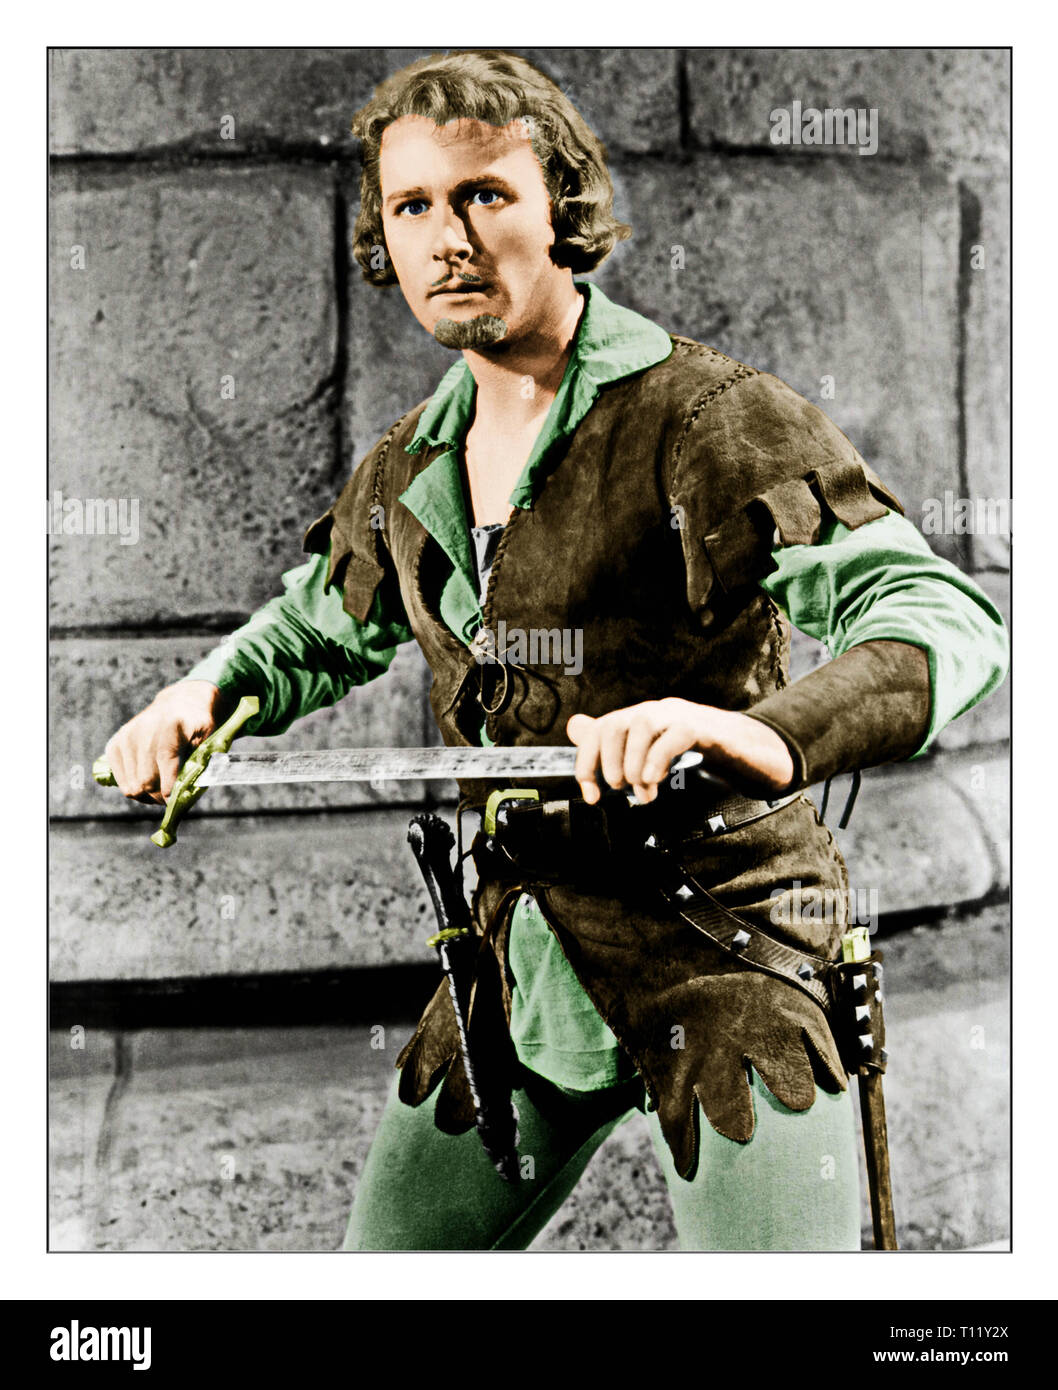 The Adventures of Robin Hood is a 1938 American Technicolor swashbuckler film from Warner Bros., produced by Hal B. Wallis and Henry Blanke, directed by Michael Curtiz and William Keighley, that stars Errol Flynn, Olivia de Havilland, Basil Rathbone, and Claude Rains. Credit: Hollywood Photo Archive / MediaPunch Stock Photo